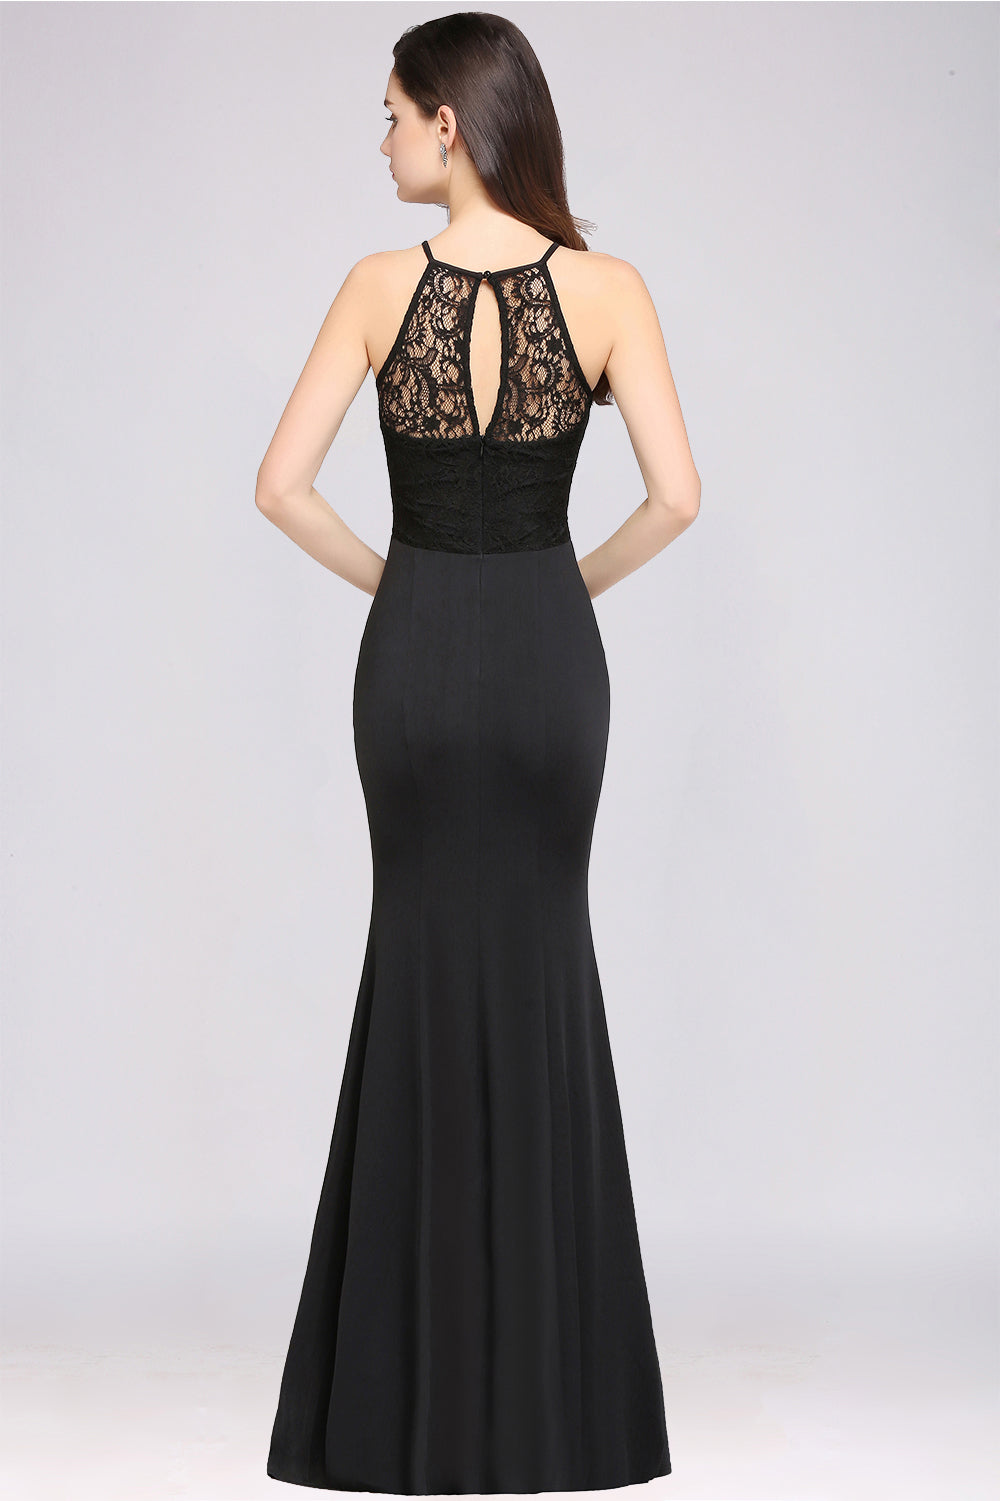 Load image into Gallery viewer, Affordable Mermaid Keyhole Black Lace Bridesmaid Dress Online-27dress
